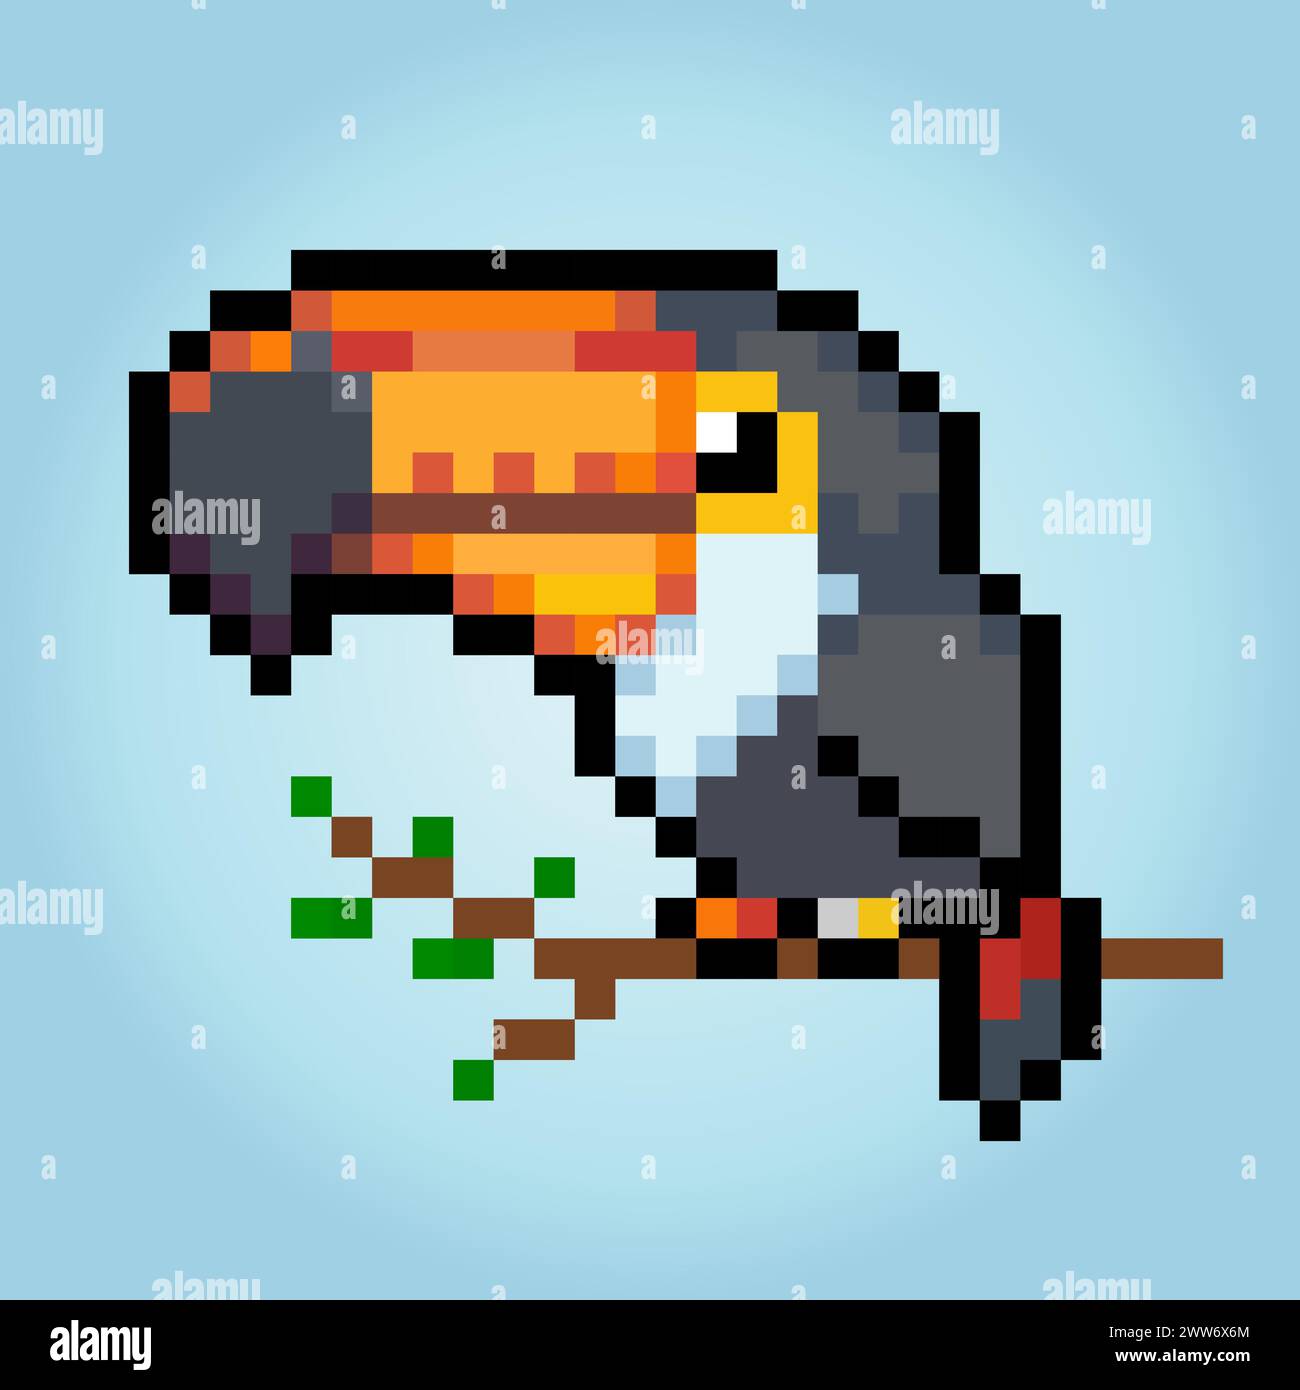 8 bit pixel toucan bird. Animal pixel in vector illustrations for game assets and cross stitch patterns. Stock Vector